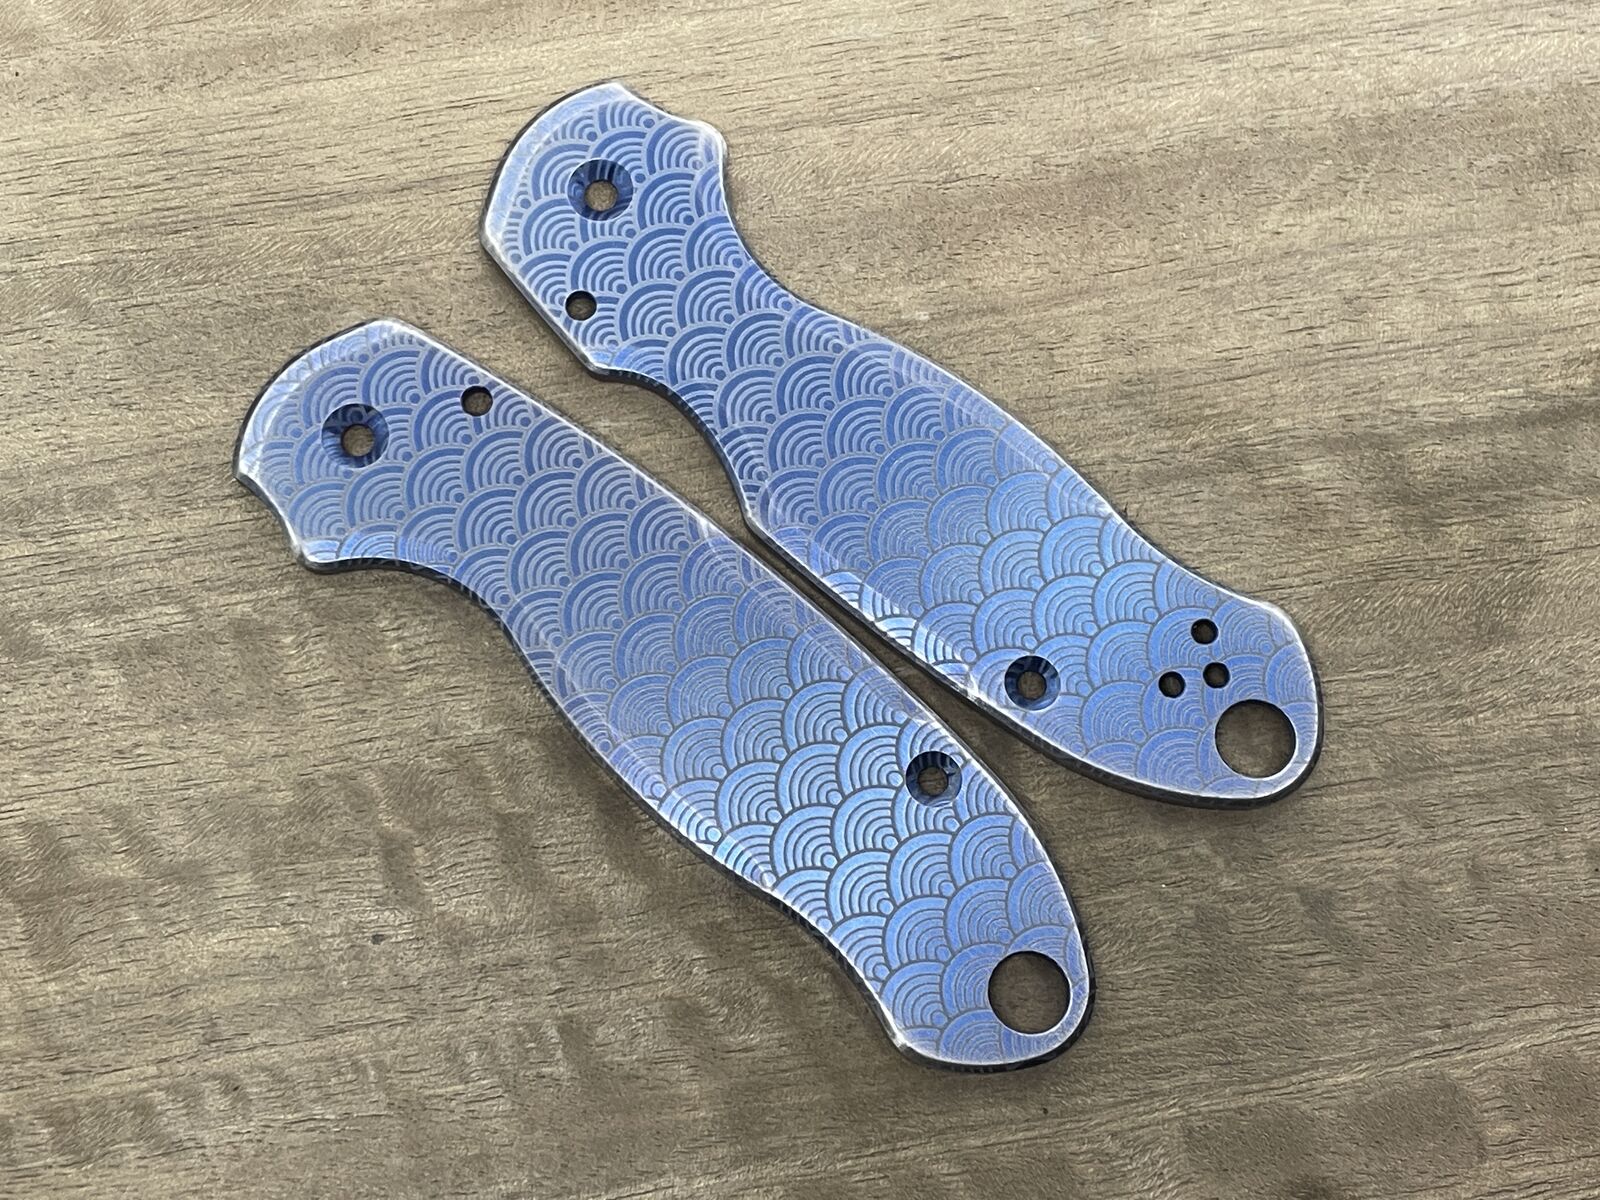 Blue anodized Brushed SEIGAIHA Titanium Scales for Spyderco Para 3